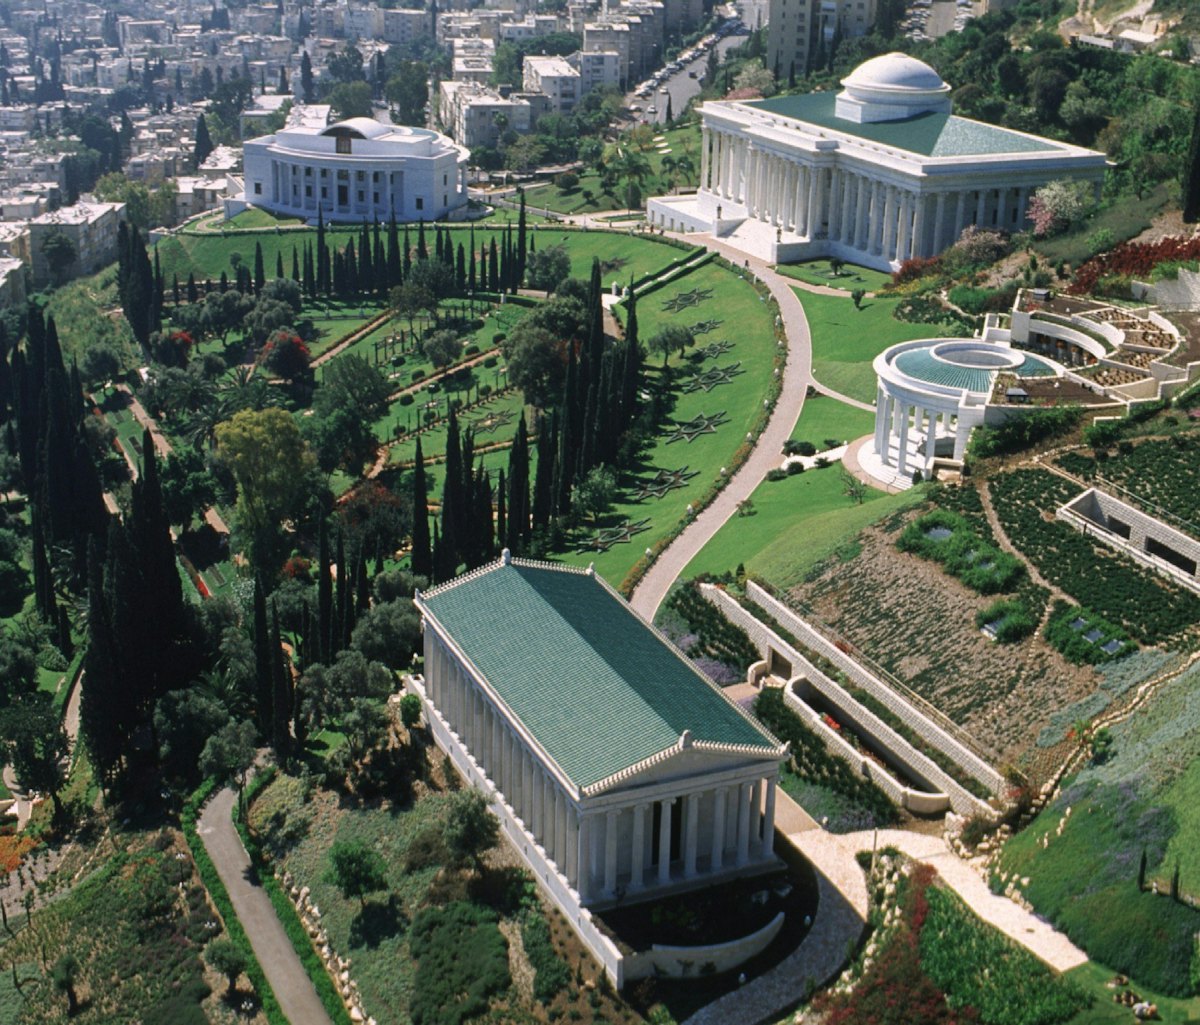 The Seat of the Universal House of Justice is the home of the Baha'i Faith's international governing body.| The Seat is flanked at left by the Seat of the International Teaching Centre, at right by the Centre for the Study of the Sacred Texts, and, in the foreground, by the International Archives Building.